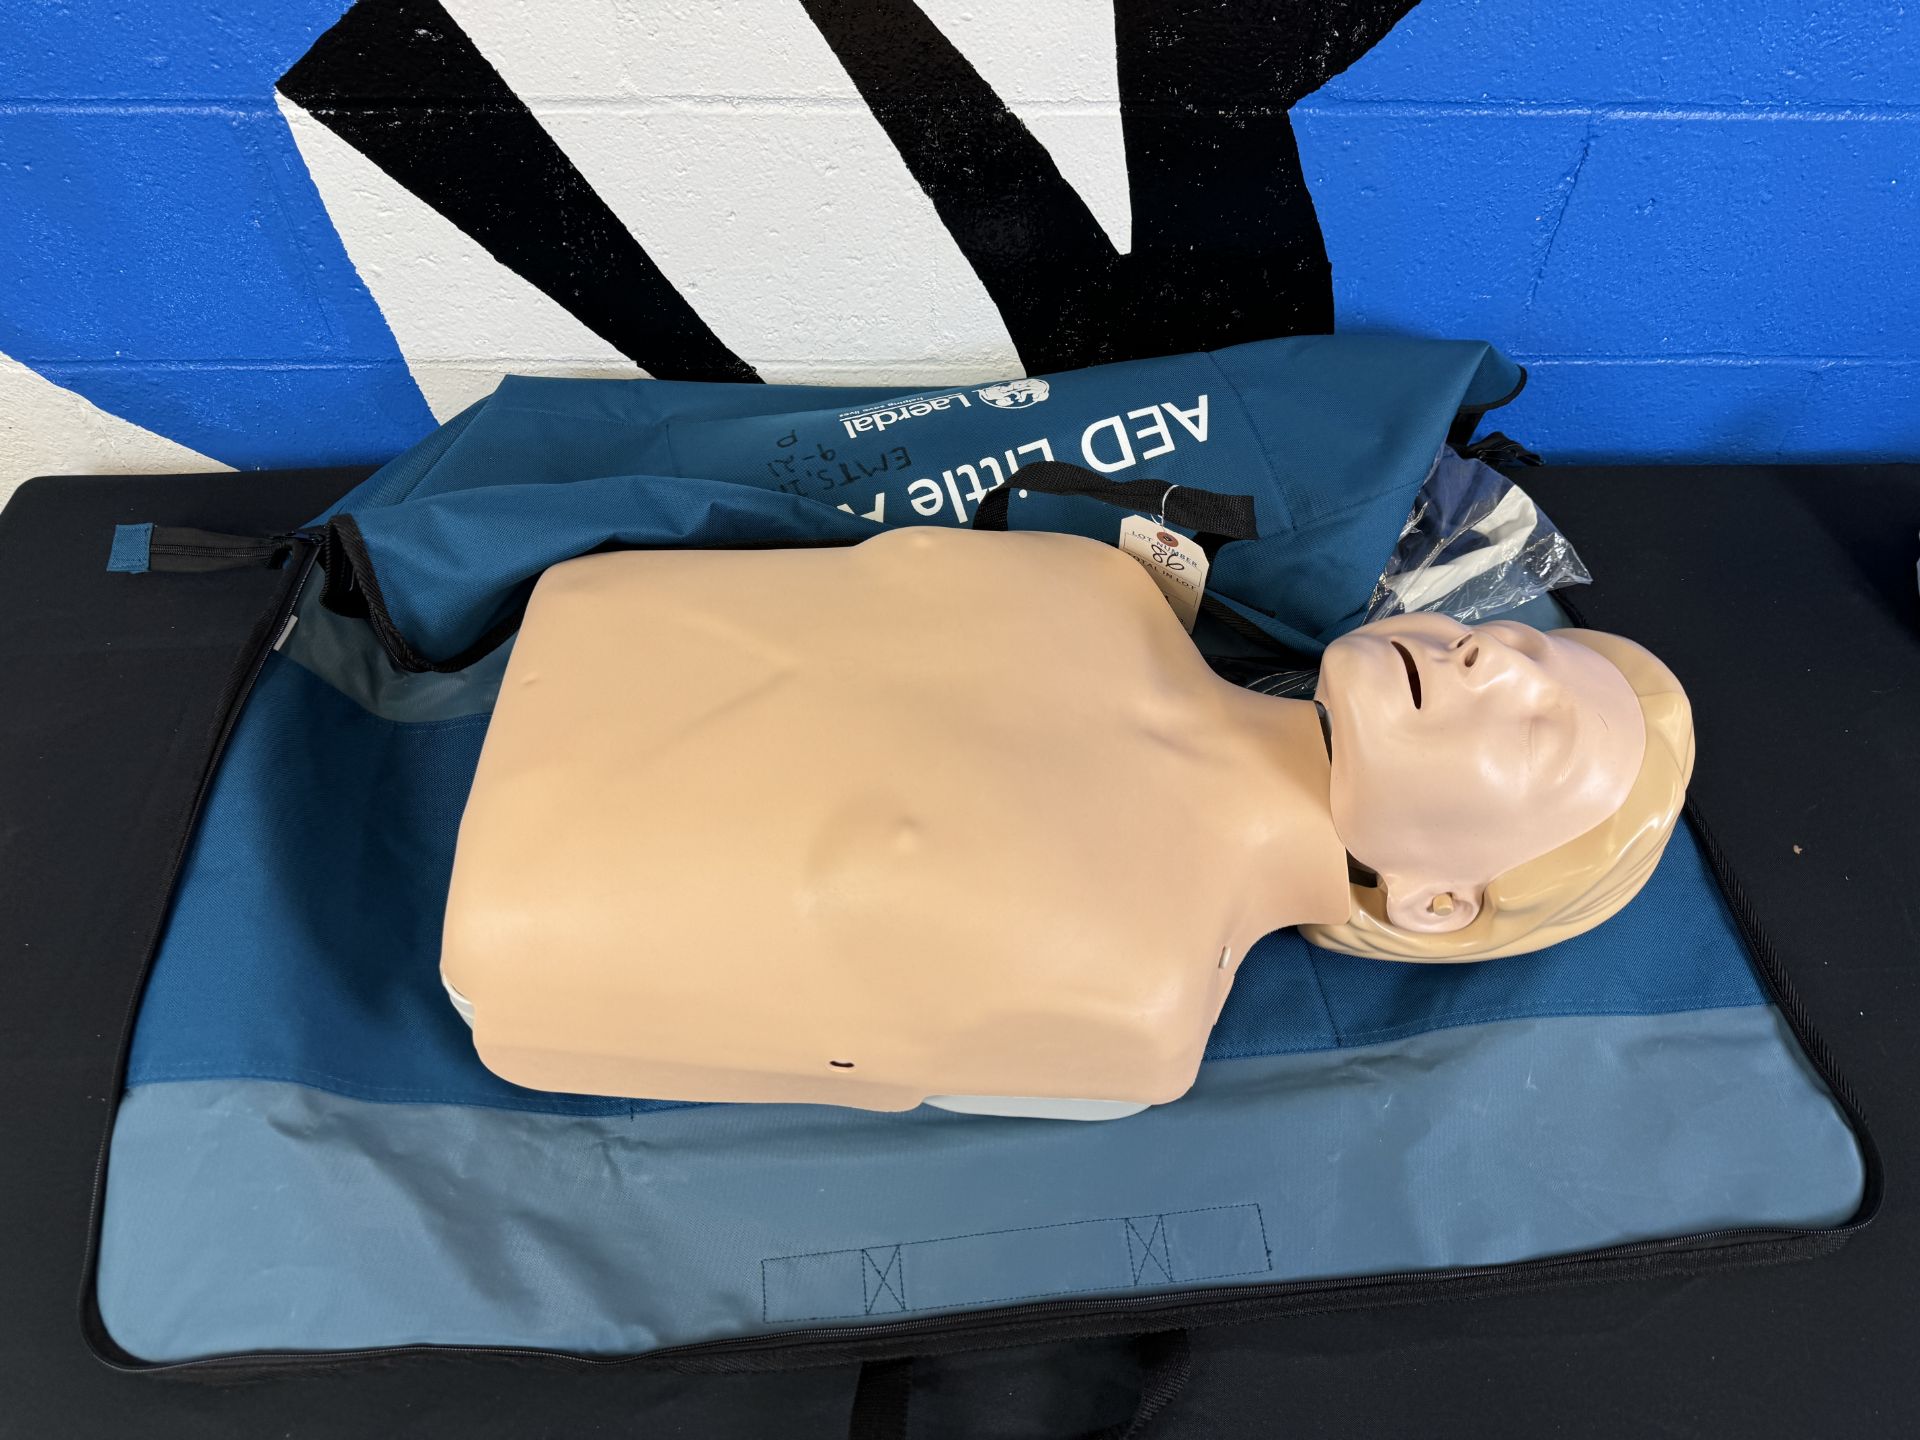 Laerdal AED Little Anne Crisis Torso Training Dummy w/ Carrying Case - Image 2 of 3